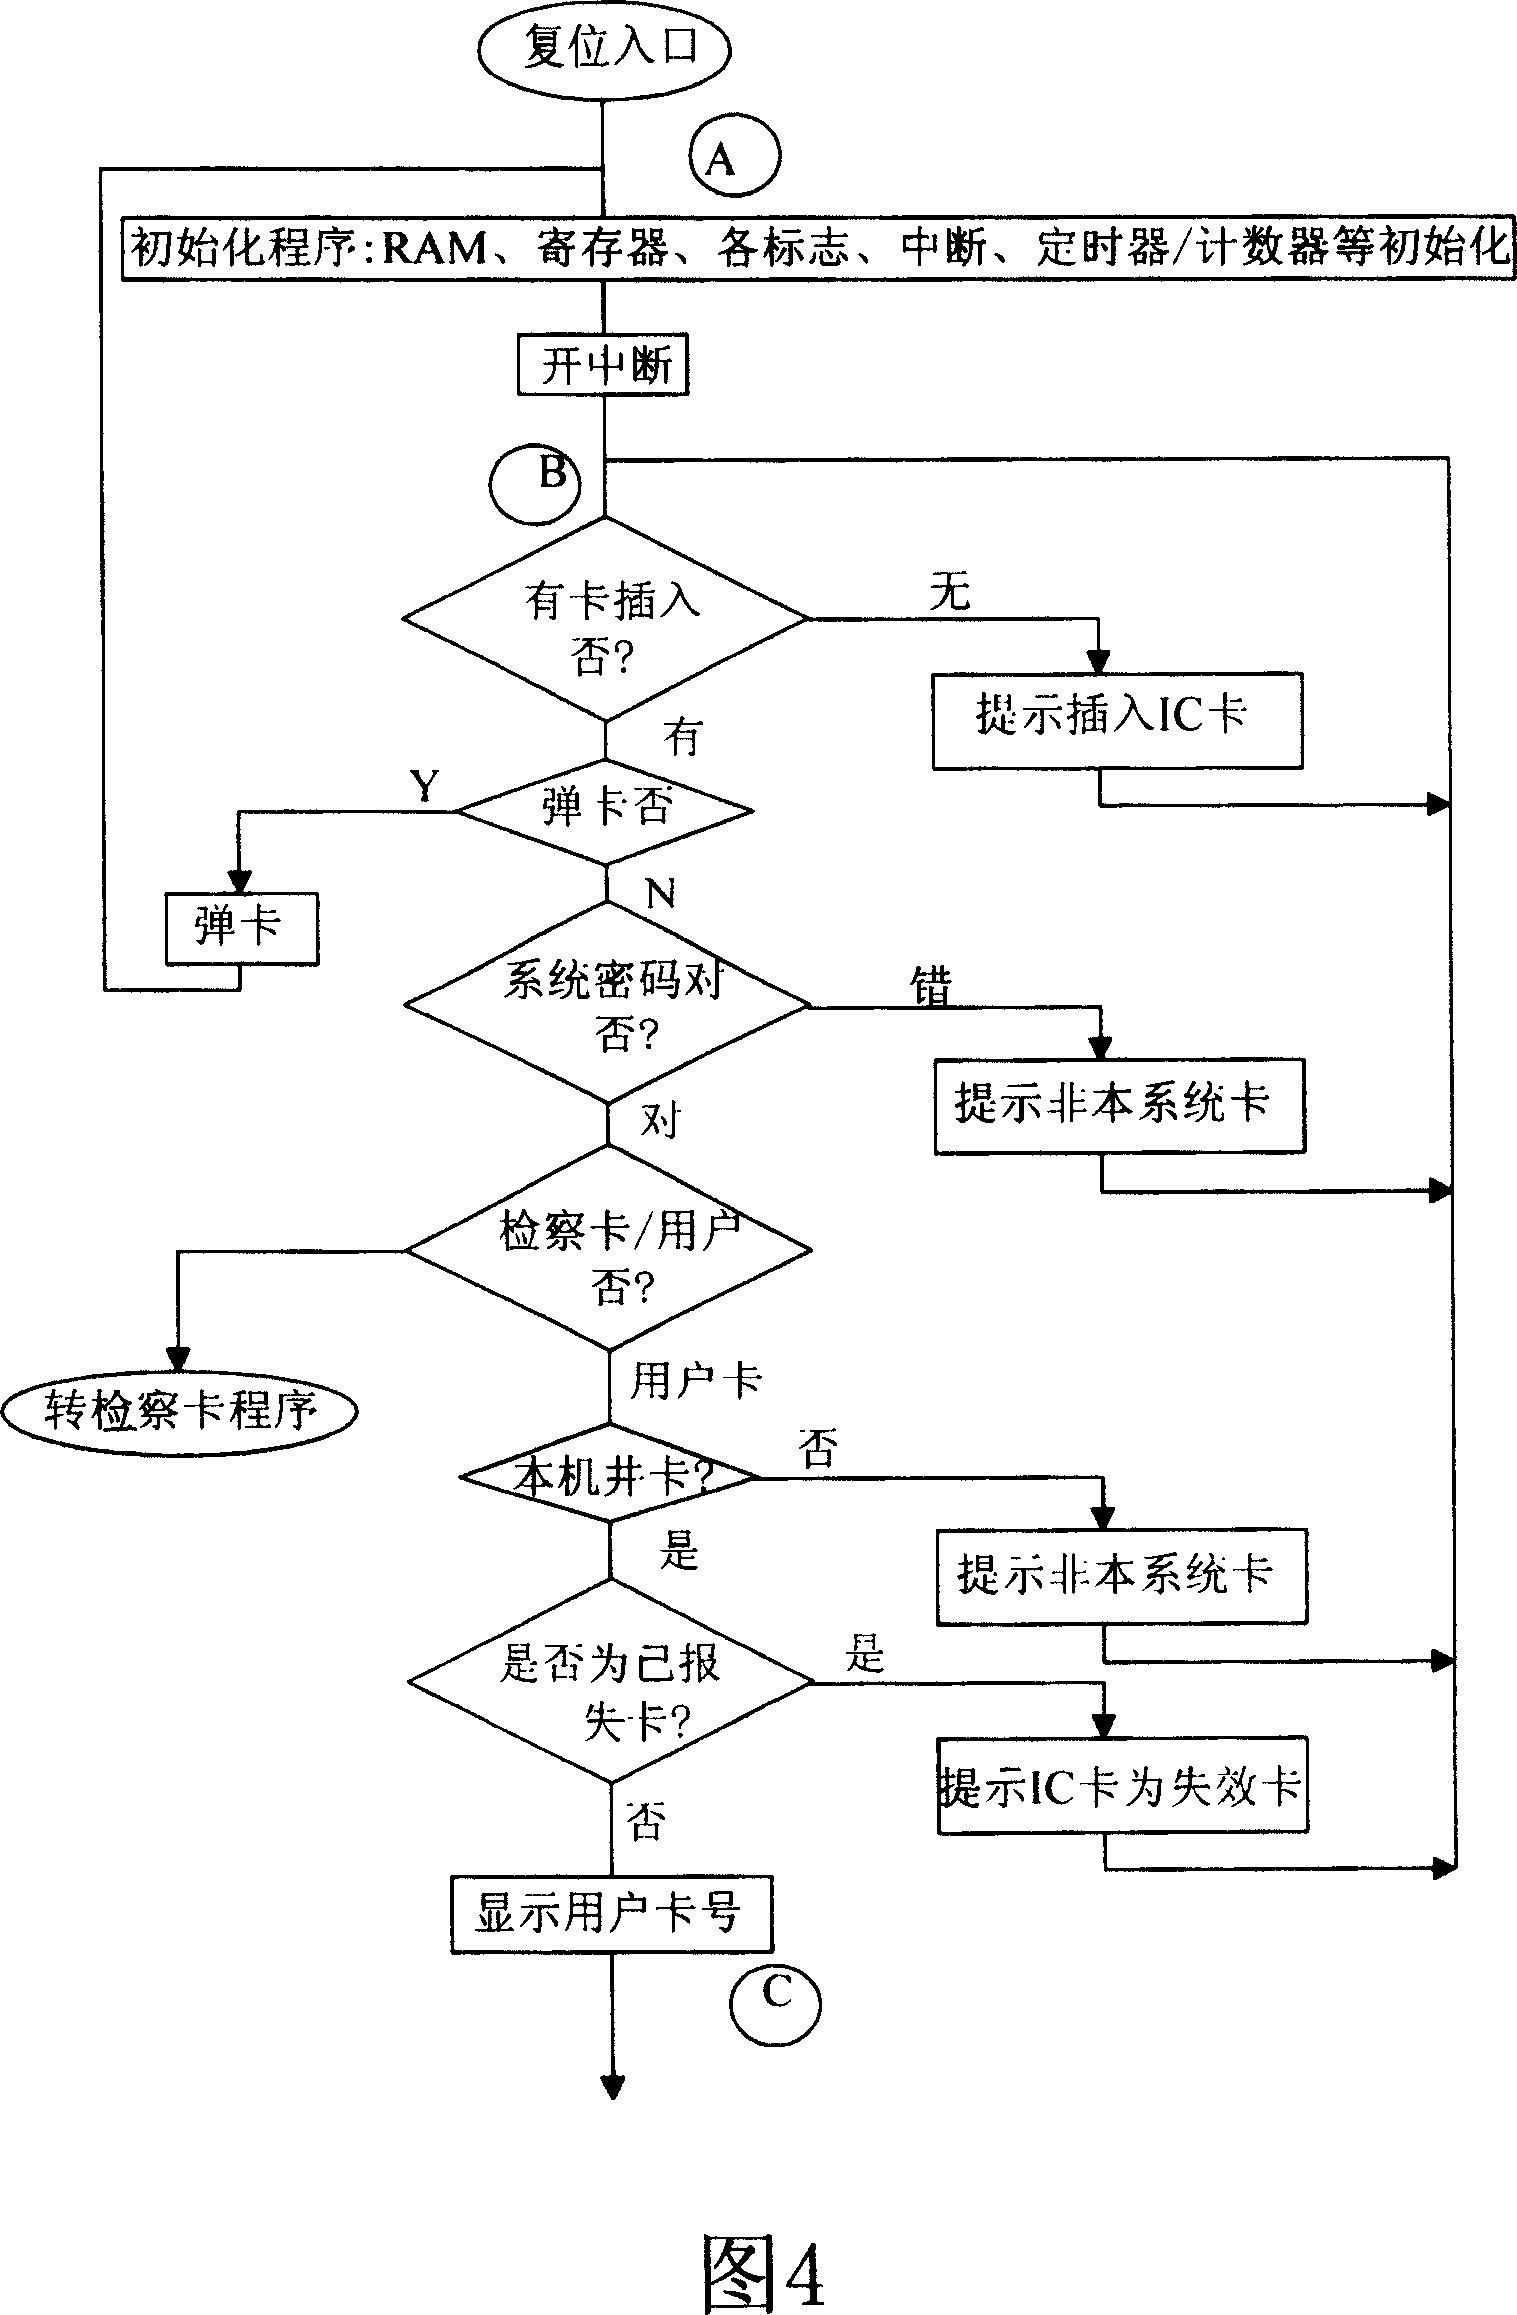 Automatic charging control system for water supply of motor-pumped well